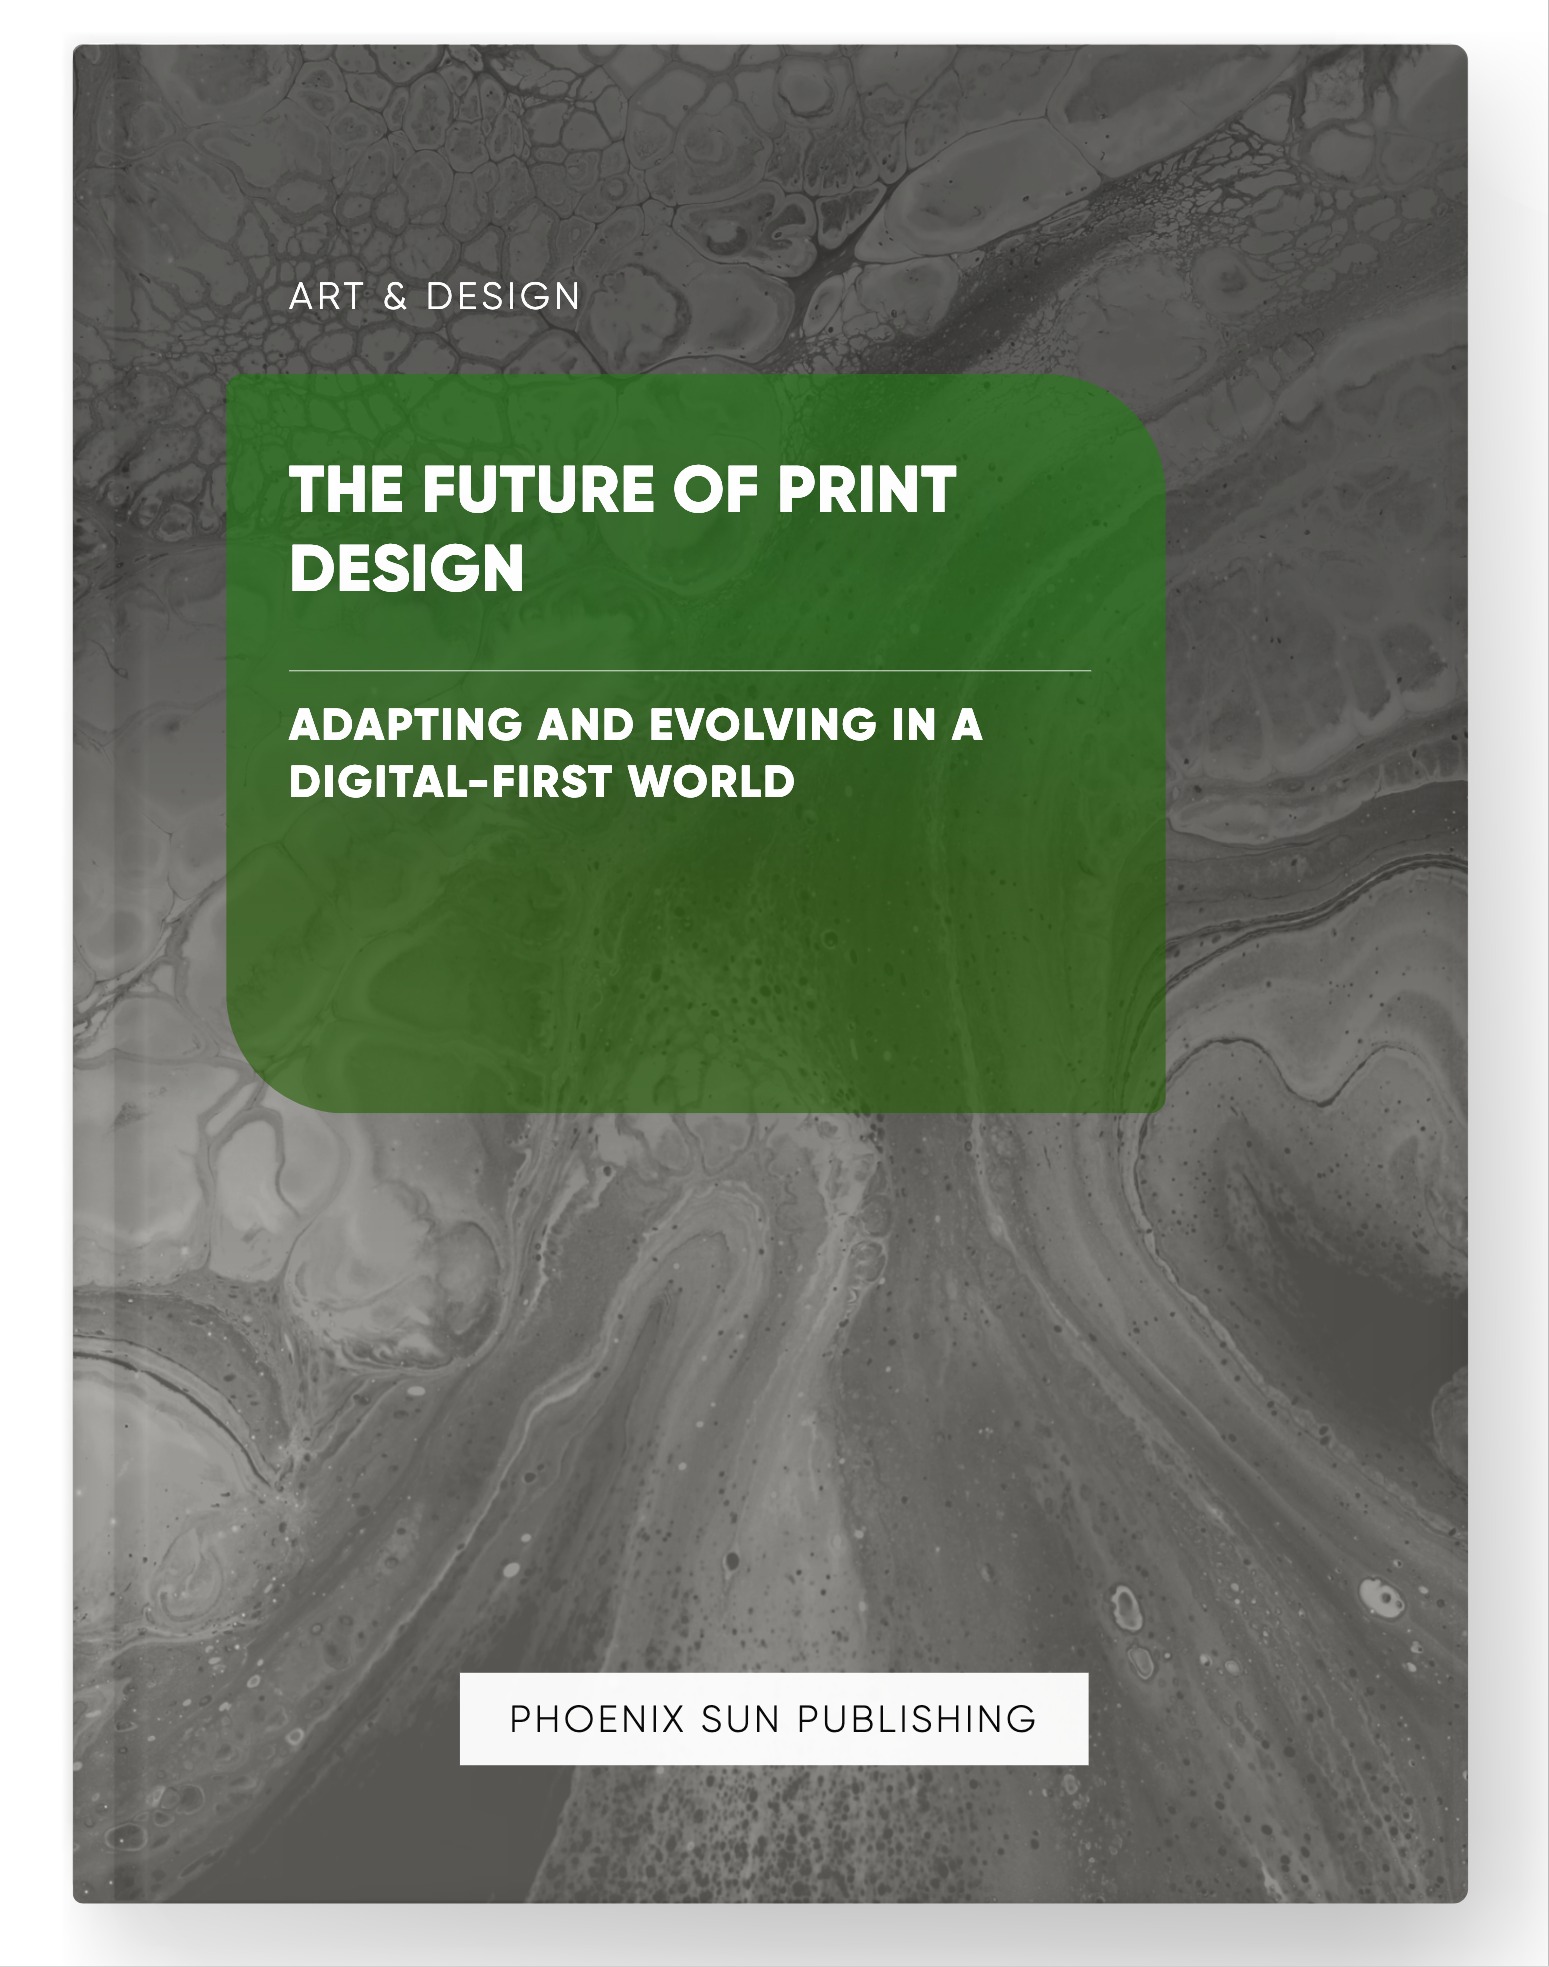 The Future of Print Design – Adapting and Evolving in a Digital-First World